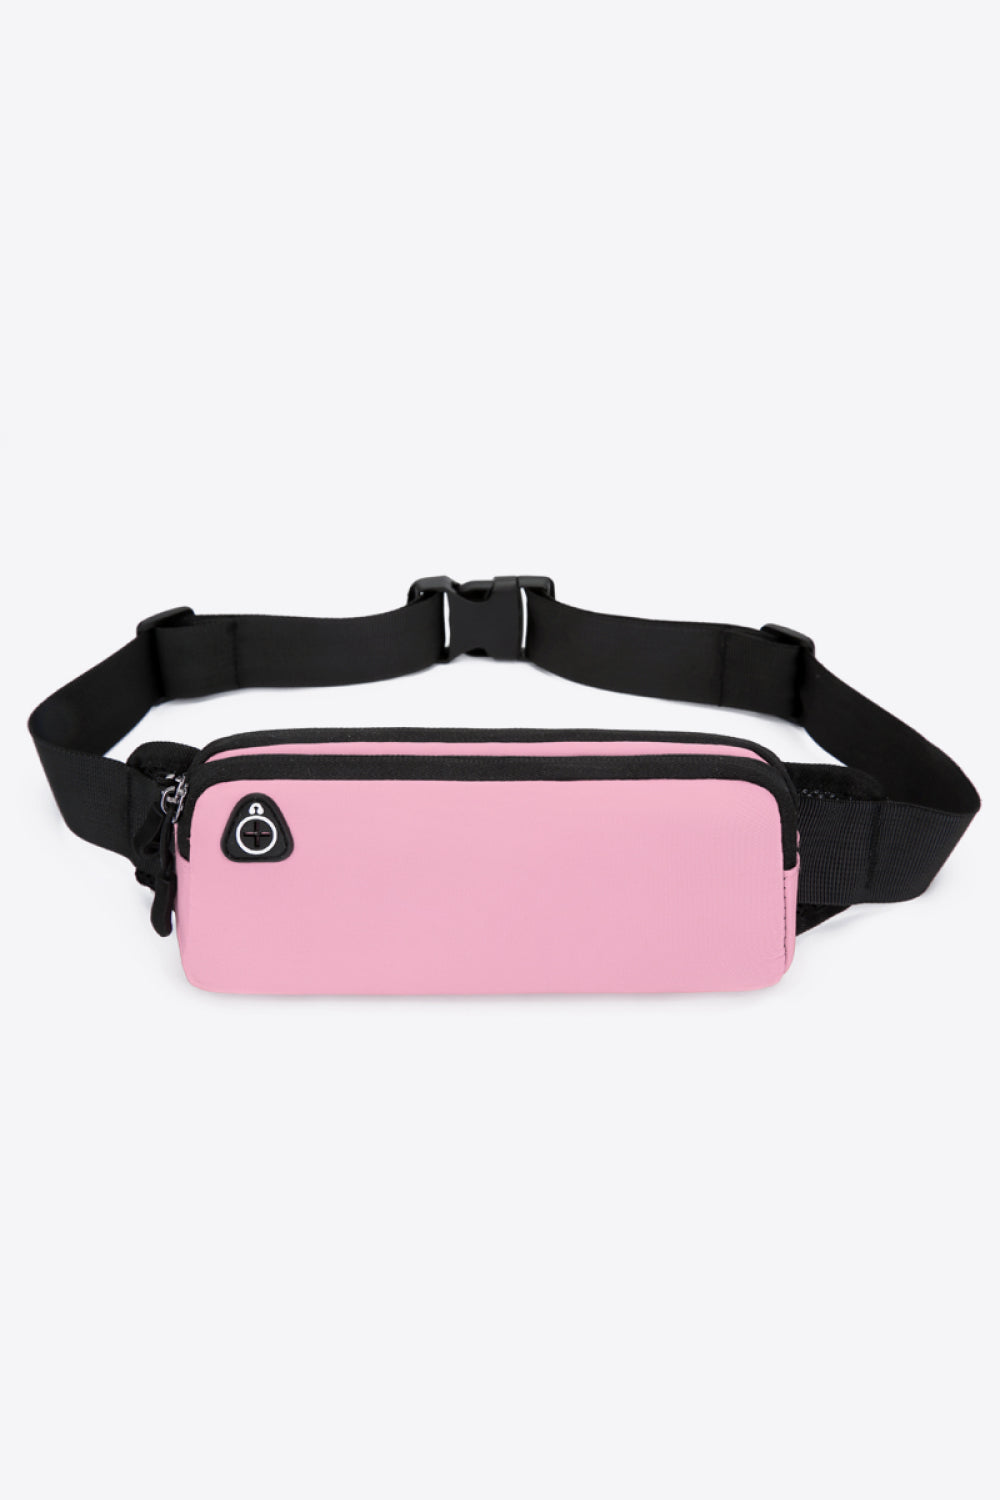 TranquilNights Small Polyester Sling Bag